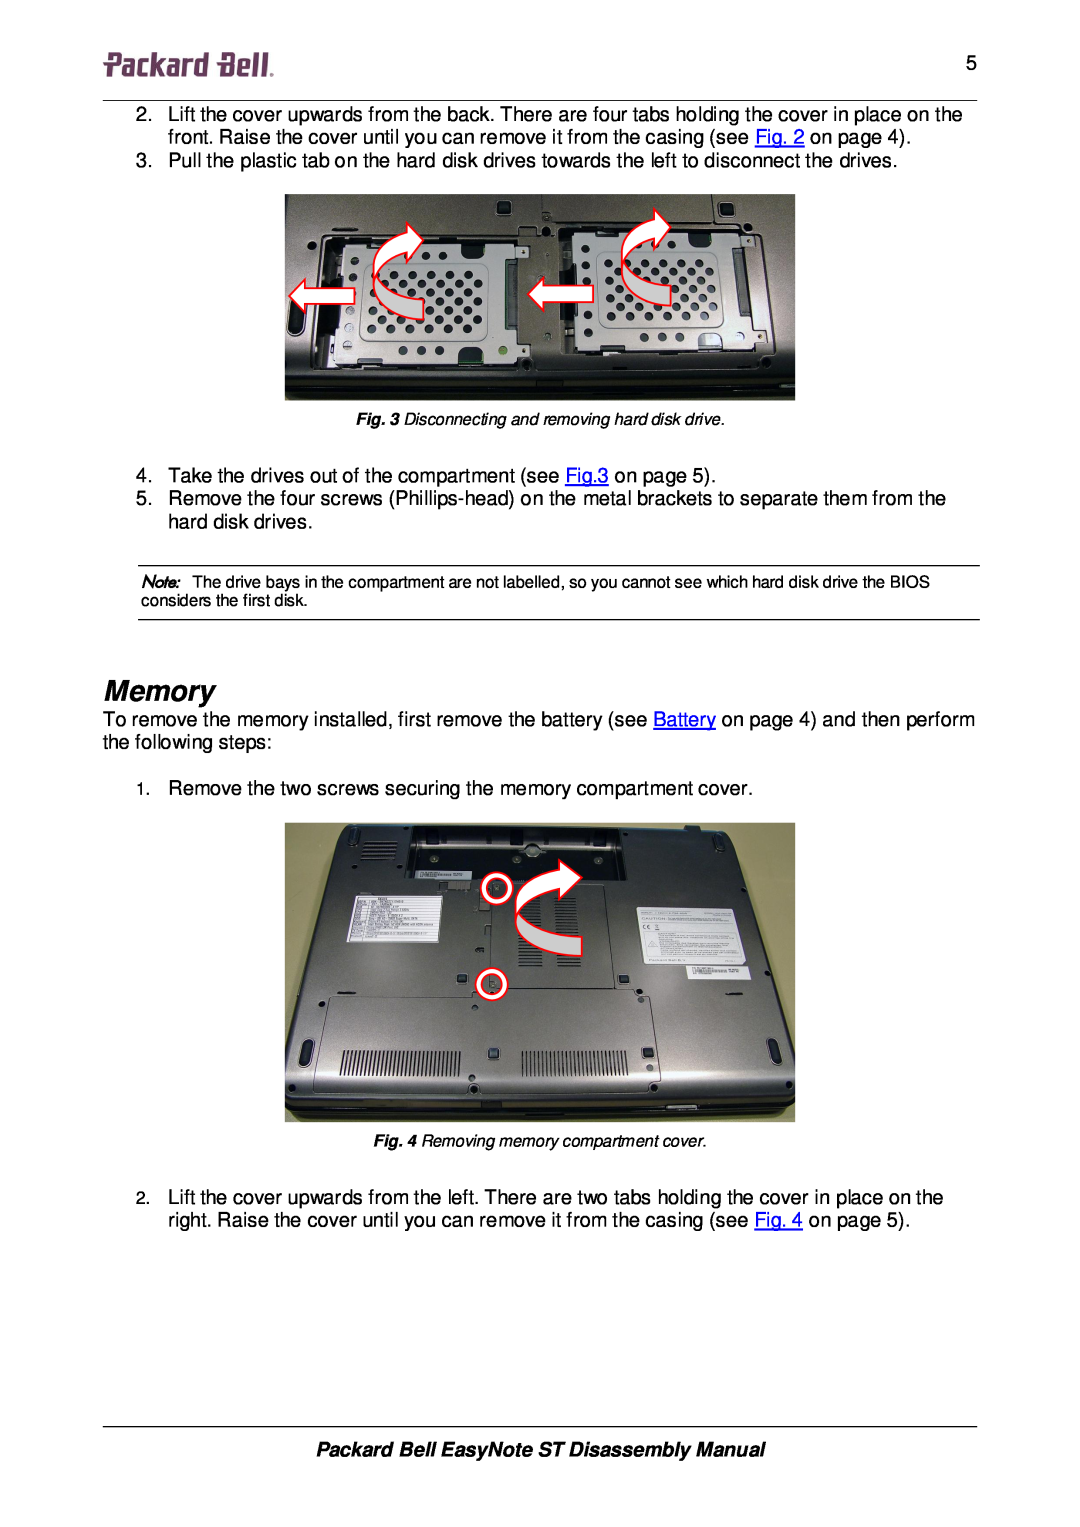 Packard Bell manual Memory, Packard Bell EasyNote ST Disassembly Manual 